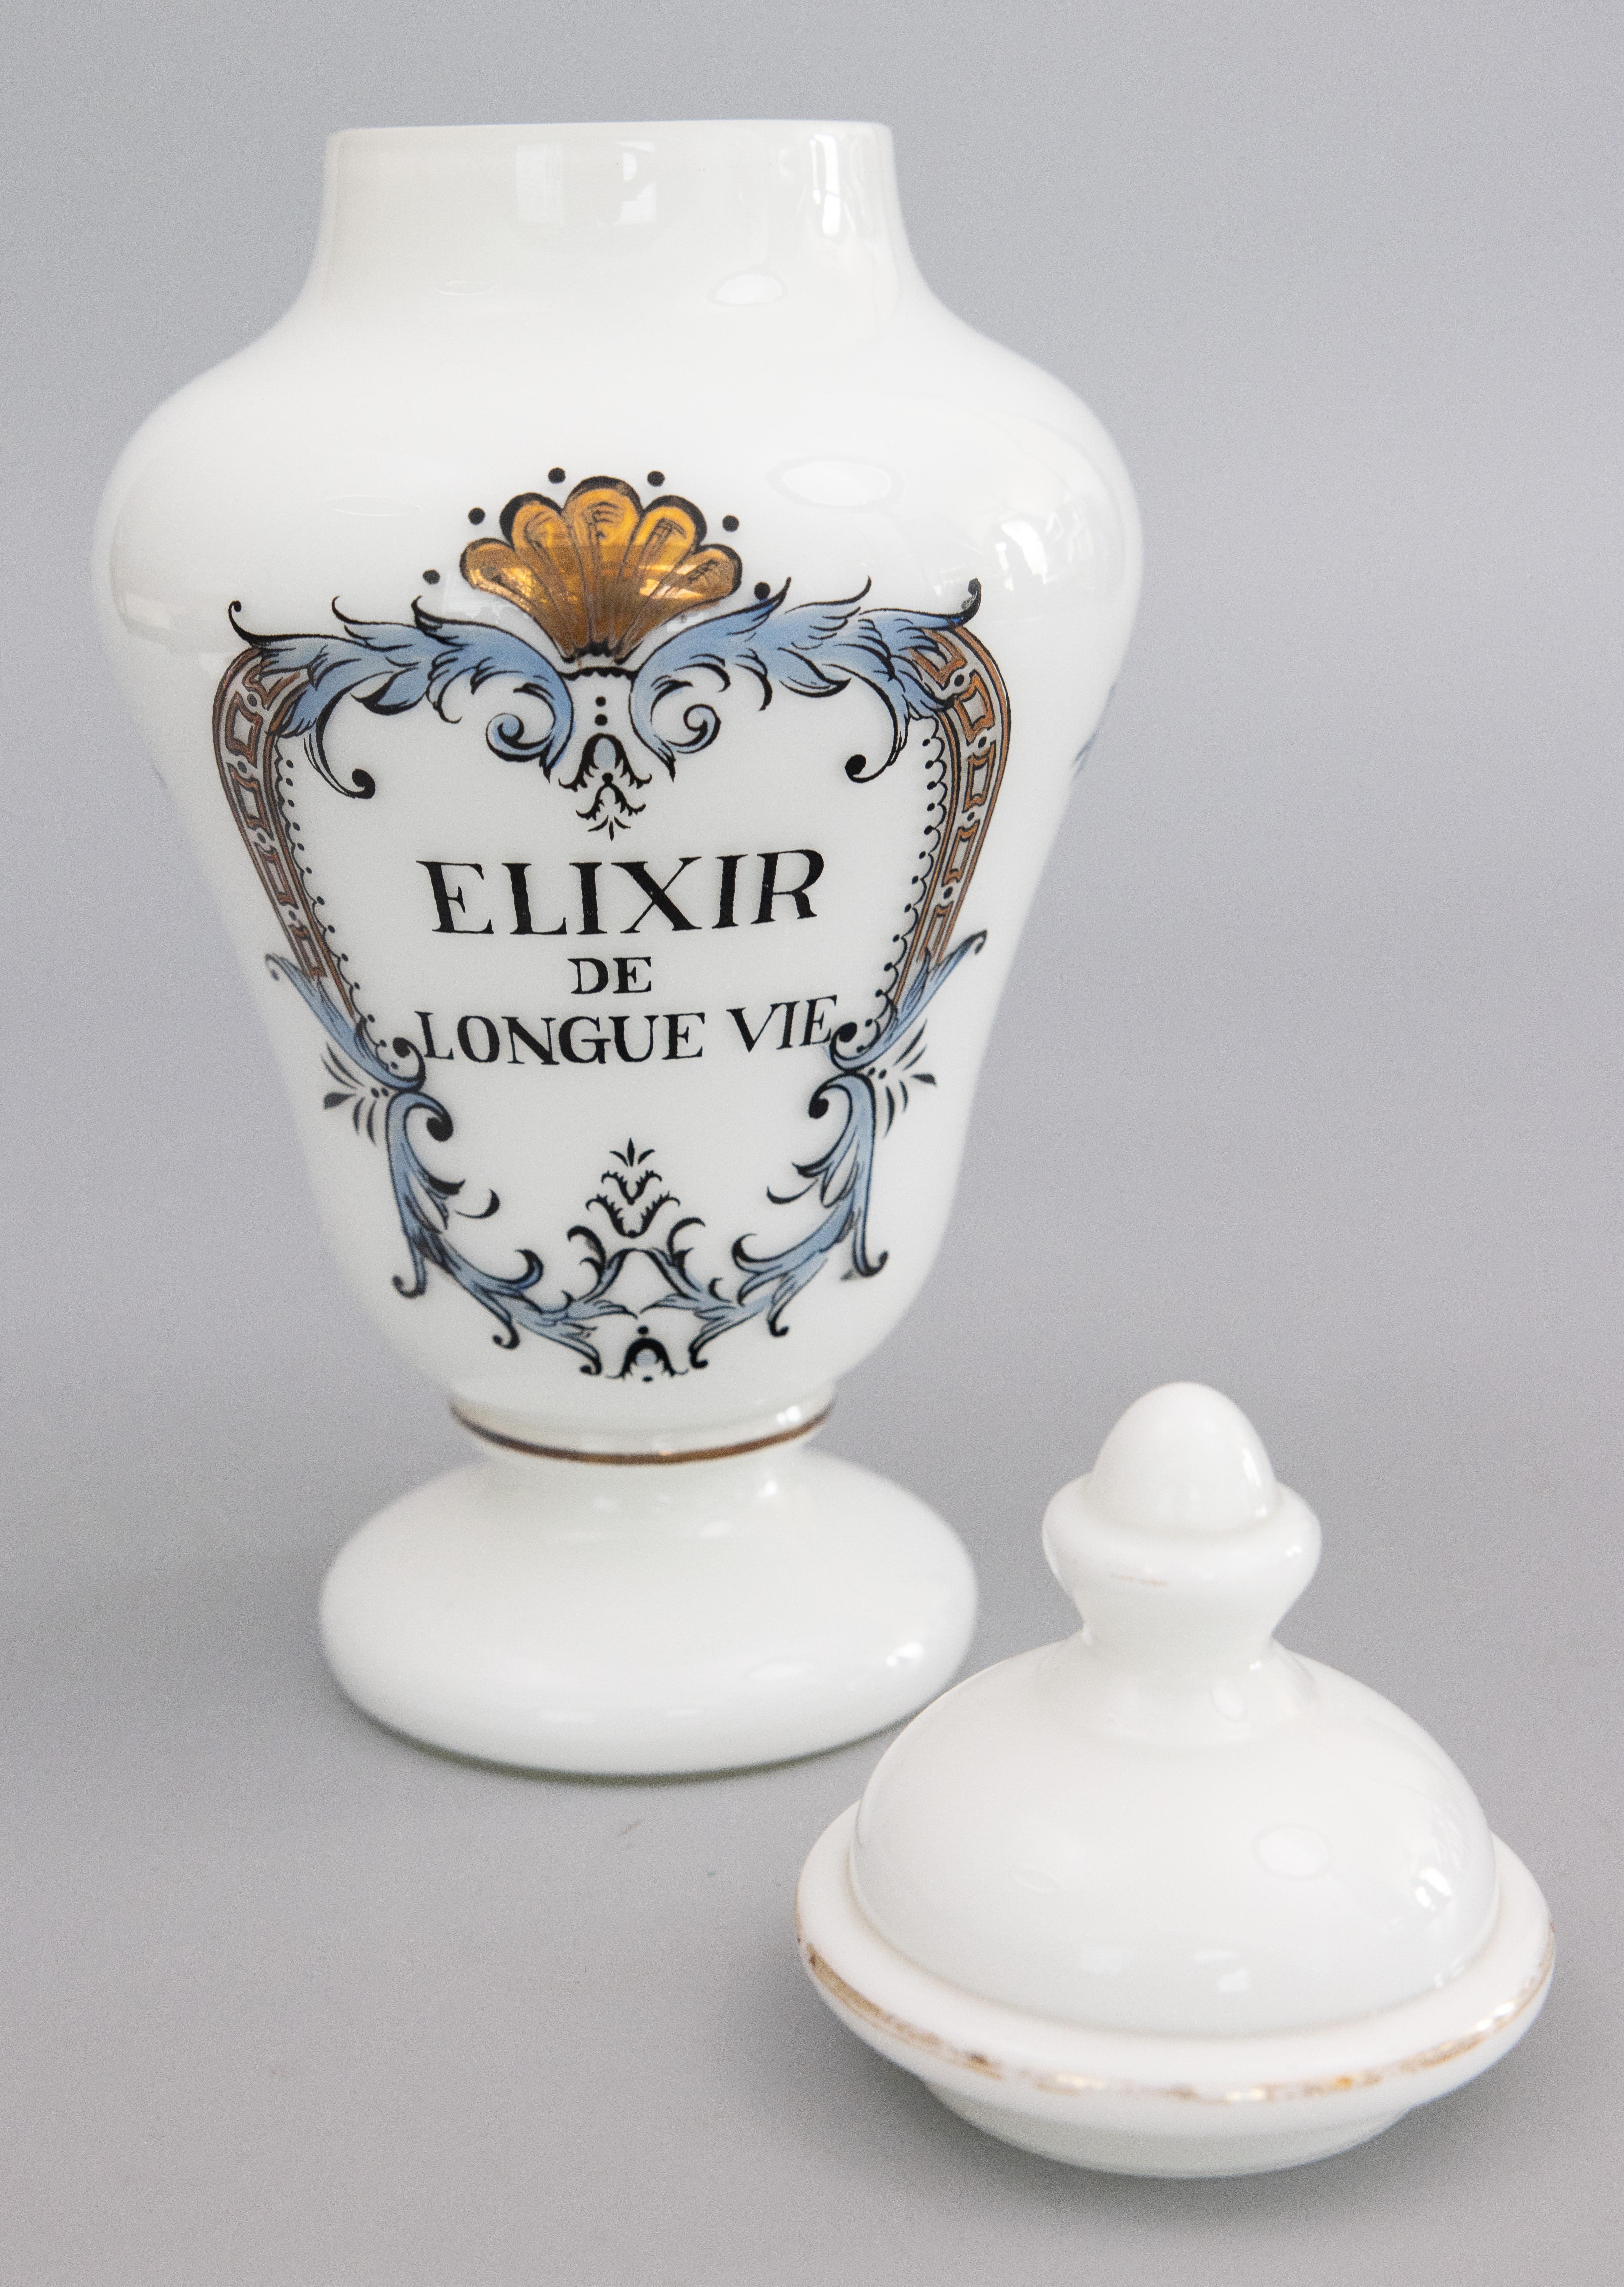 A beautiful antique early 20th-Century French glass lidded apothecary or pharmacy jar. It is decorated with lovely light blue scrolls and gold accents surrounding the words 